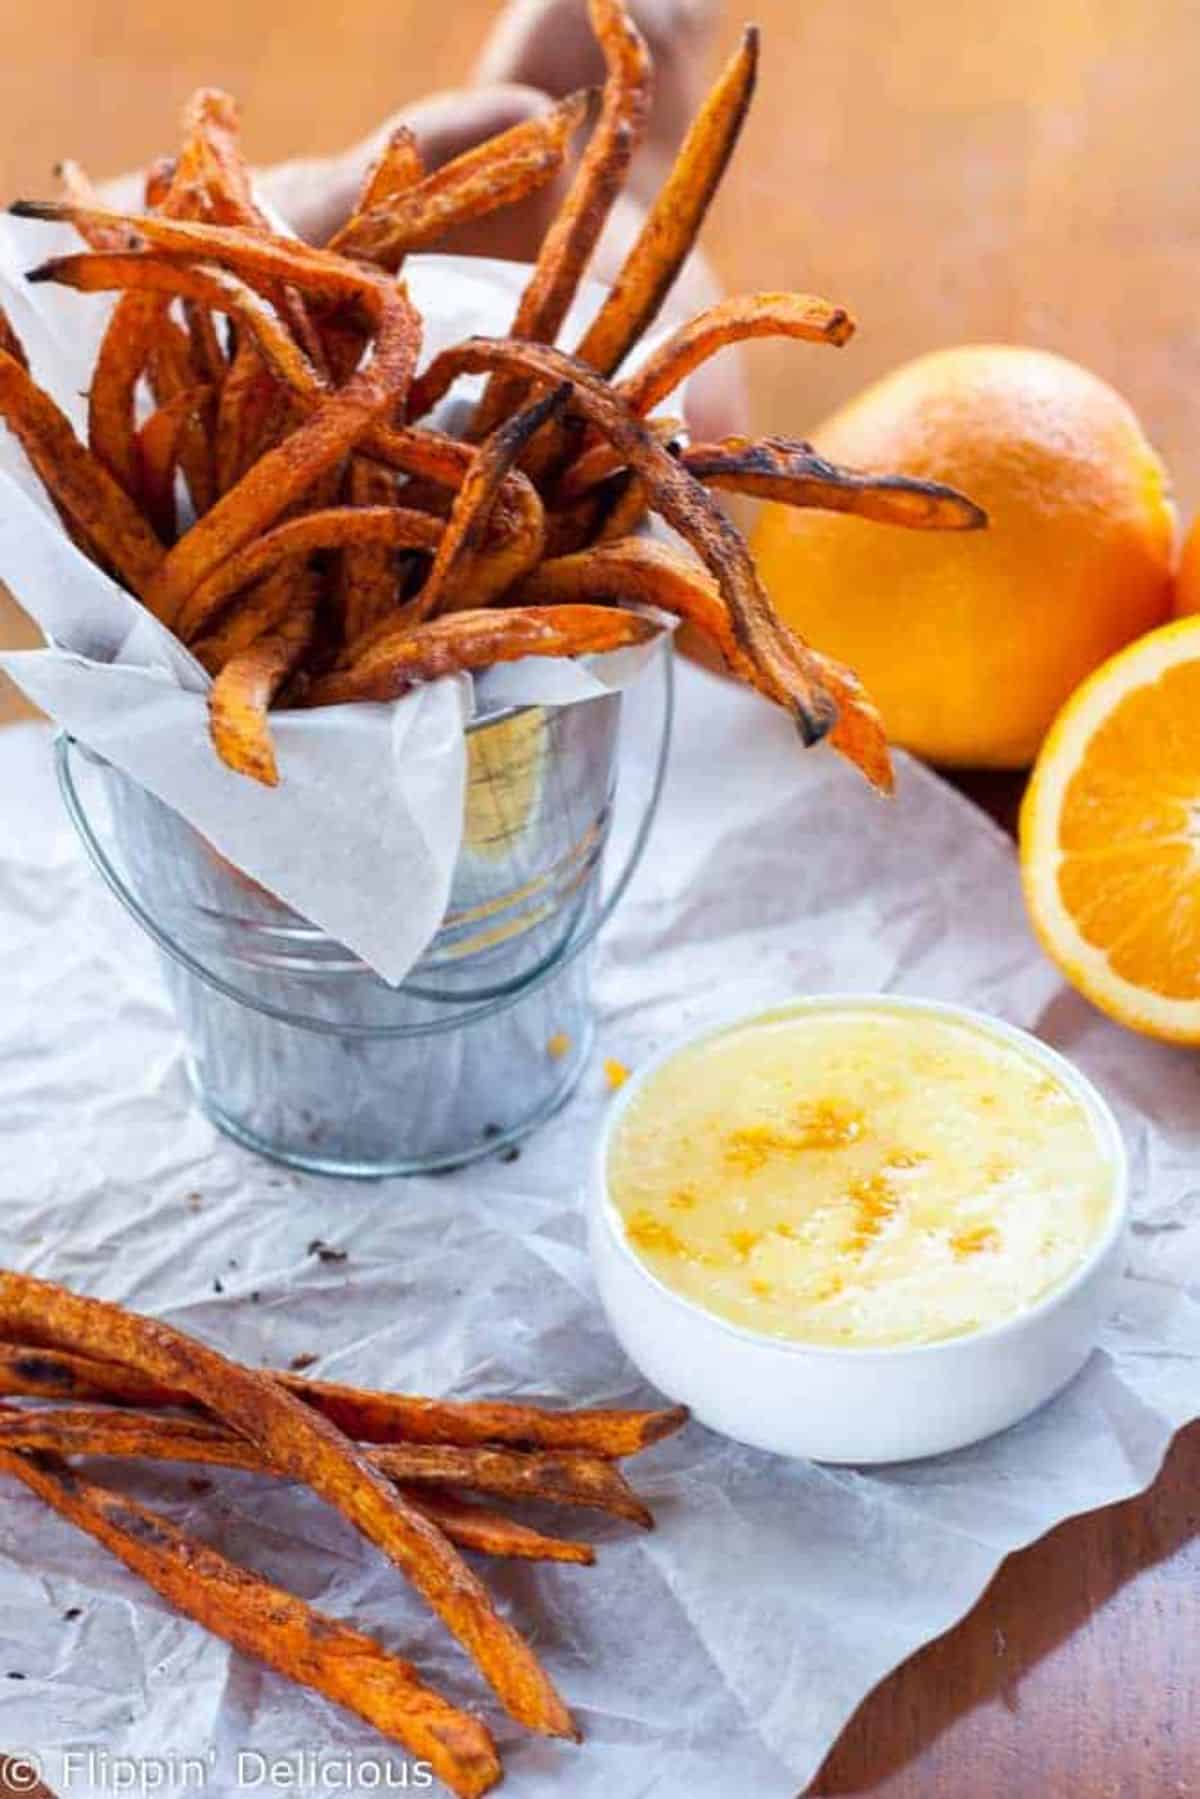 Crispy Baked Sweet Potato Fries in a metal bucket With Orange Zest Icing Dipping on a table.